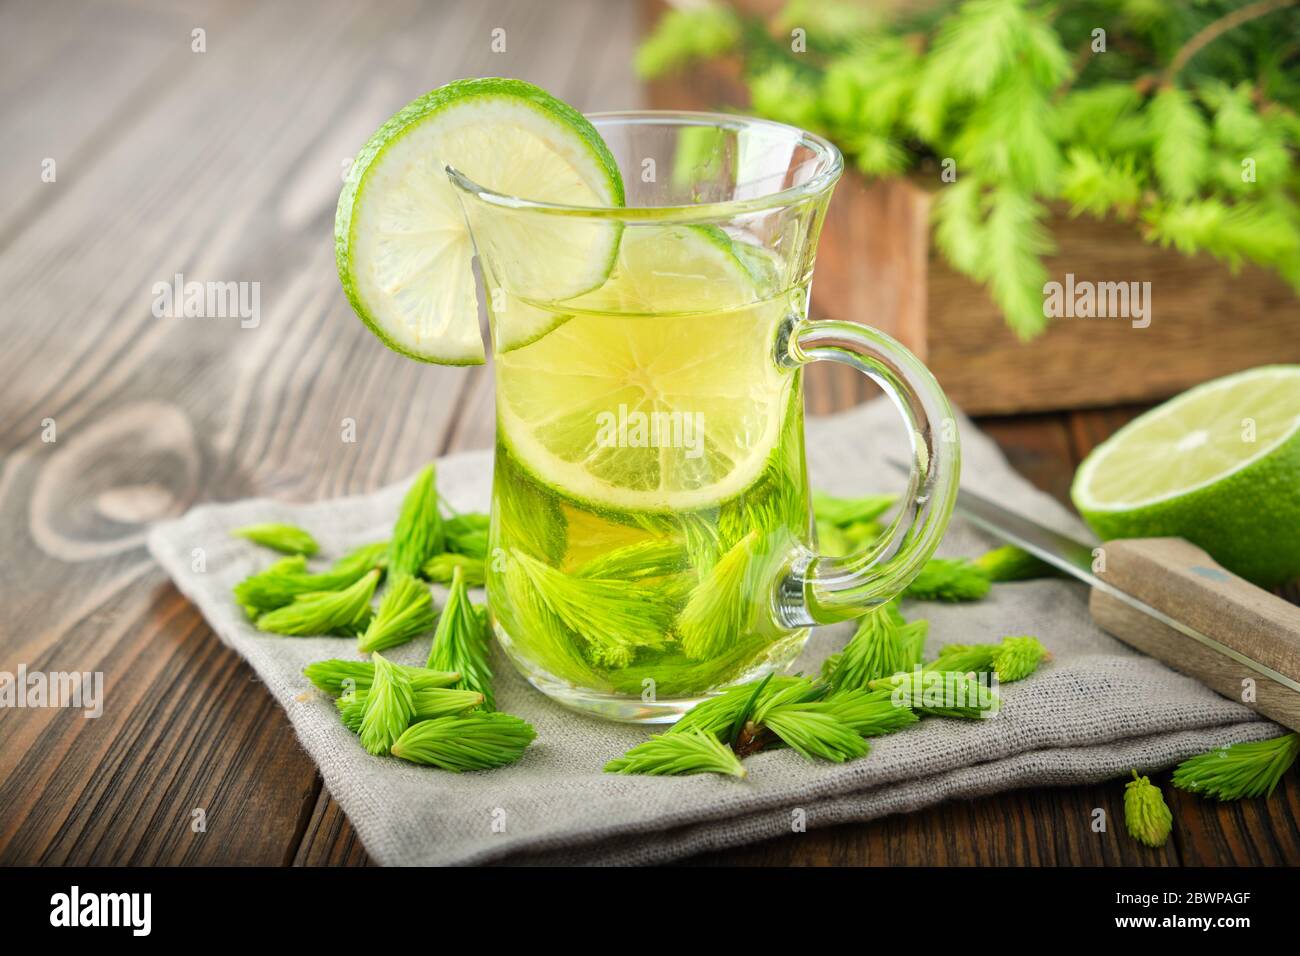 Detox water infused with sliced lime and spruce tips. Homemade refreshing lemonade or vitamin drink. Stock Photo